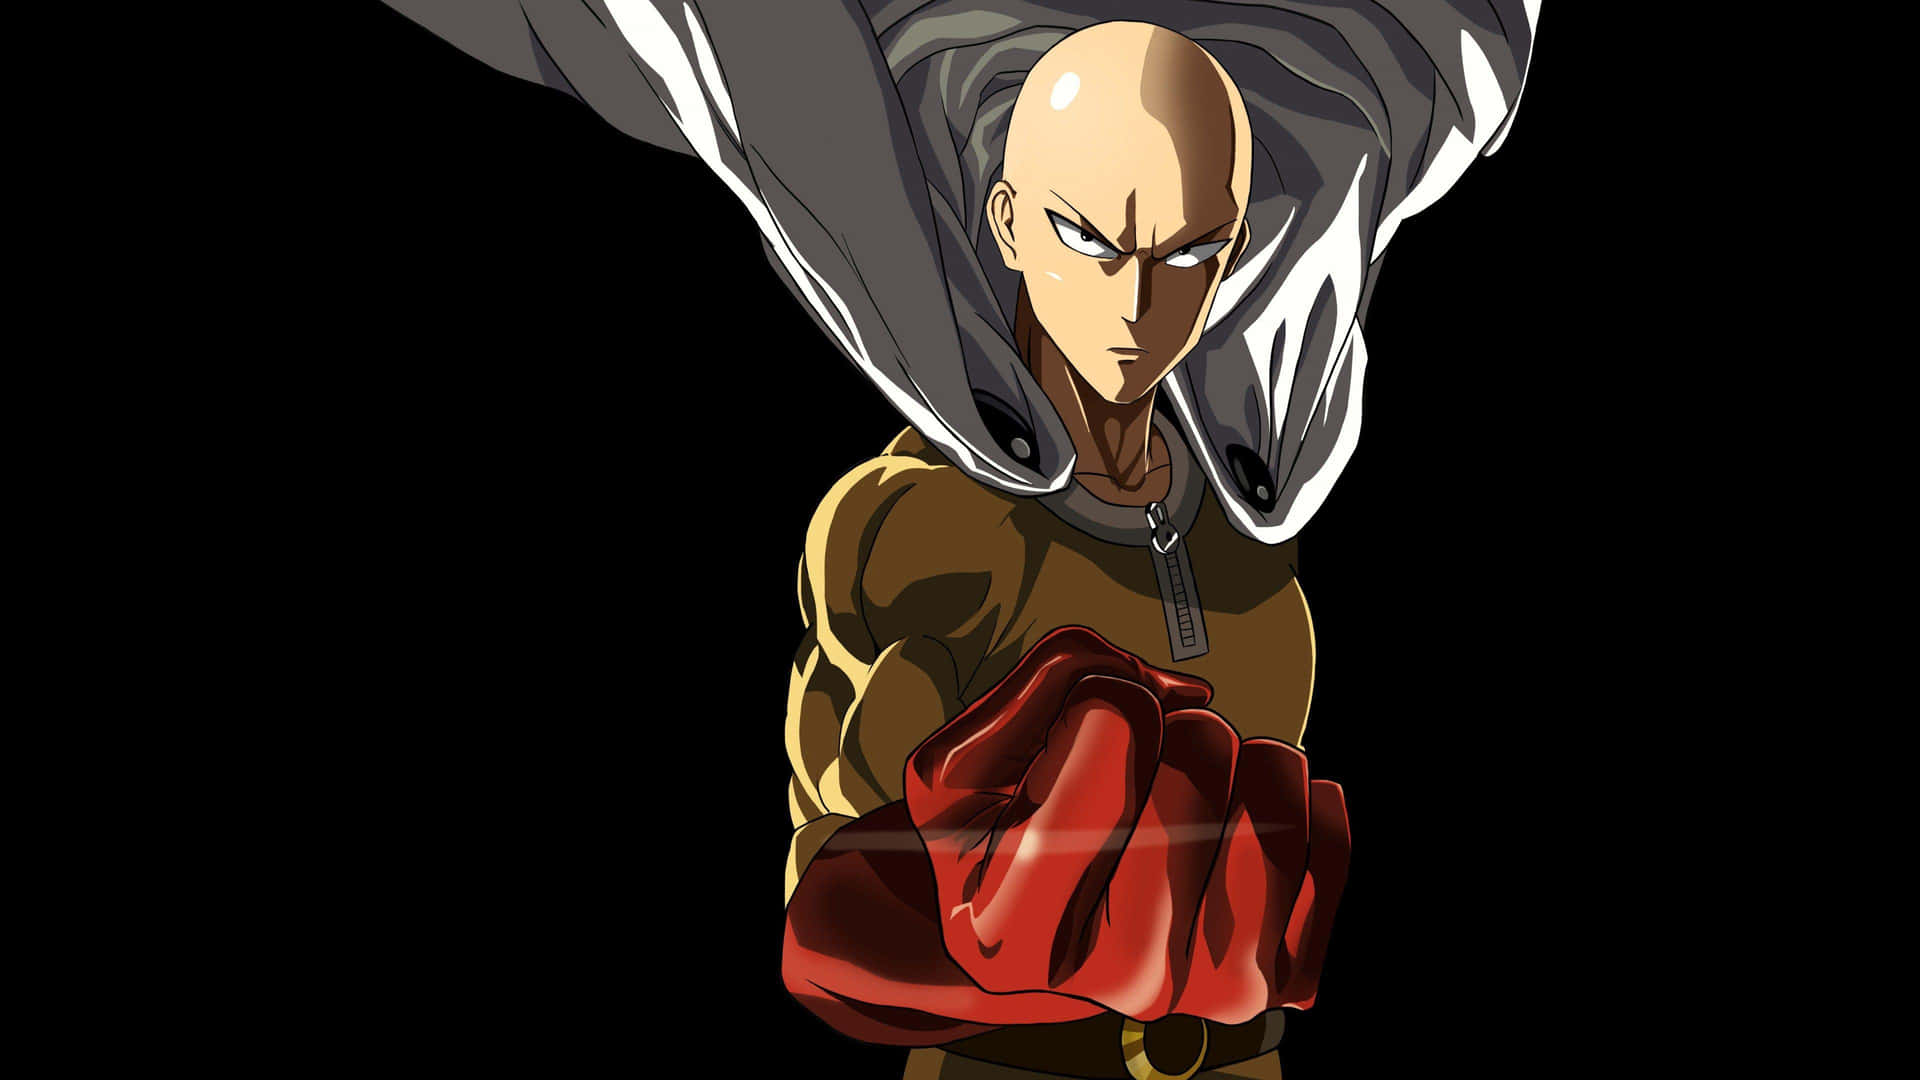 Join the Justice of Saitama!